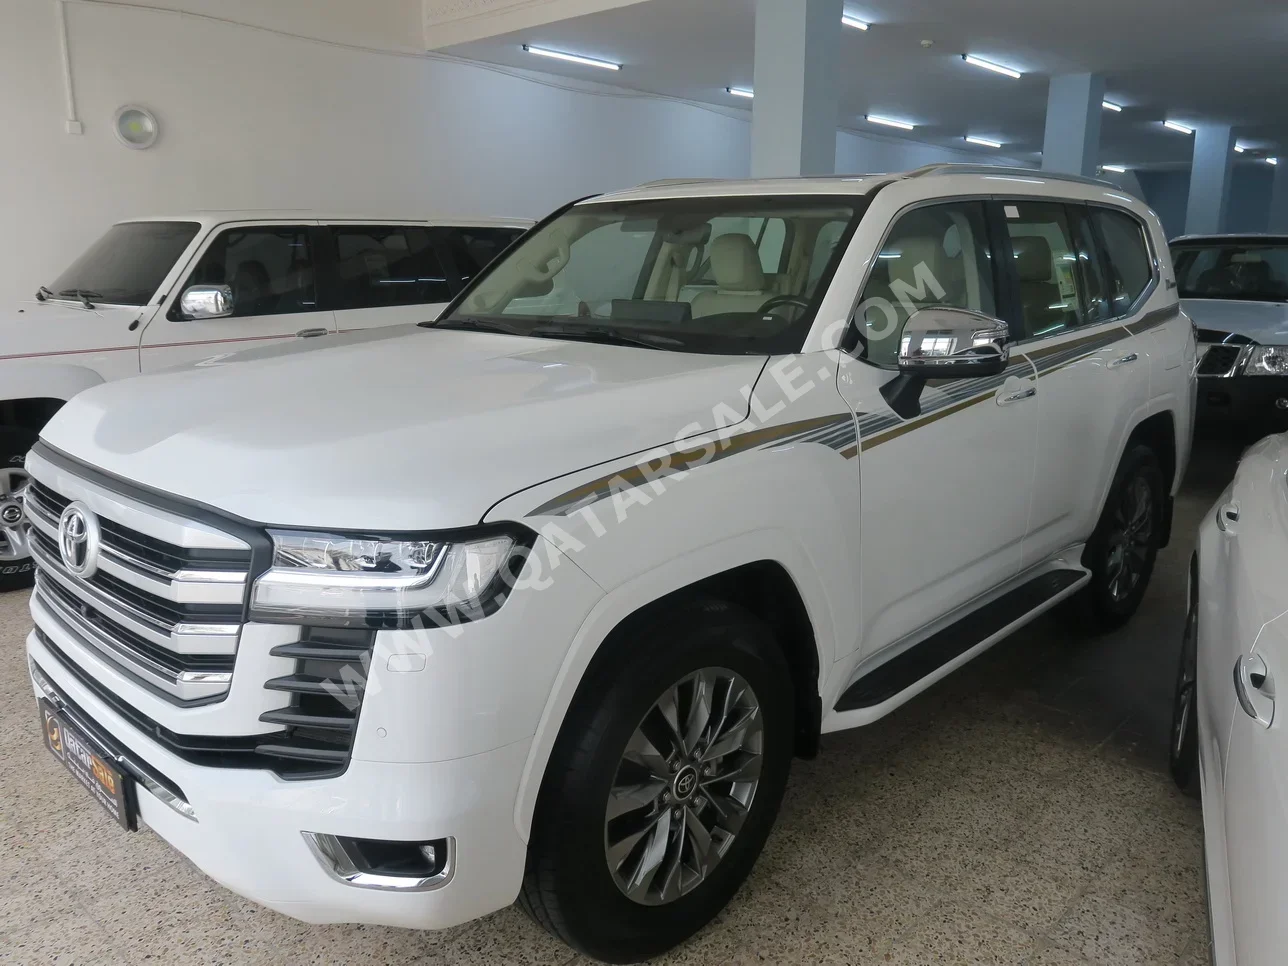 Toyota  Land Cruiser  VX Twin Turbo  2022  Automatic  69,000 Km  6 Cylinder  Four Wheel Drive (4WD)  SUV  White  With Warranty